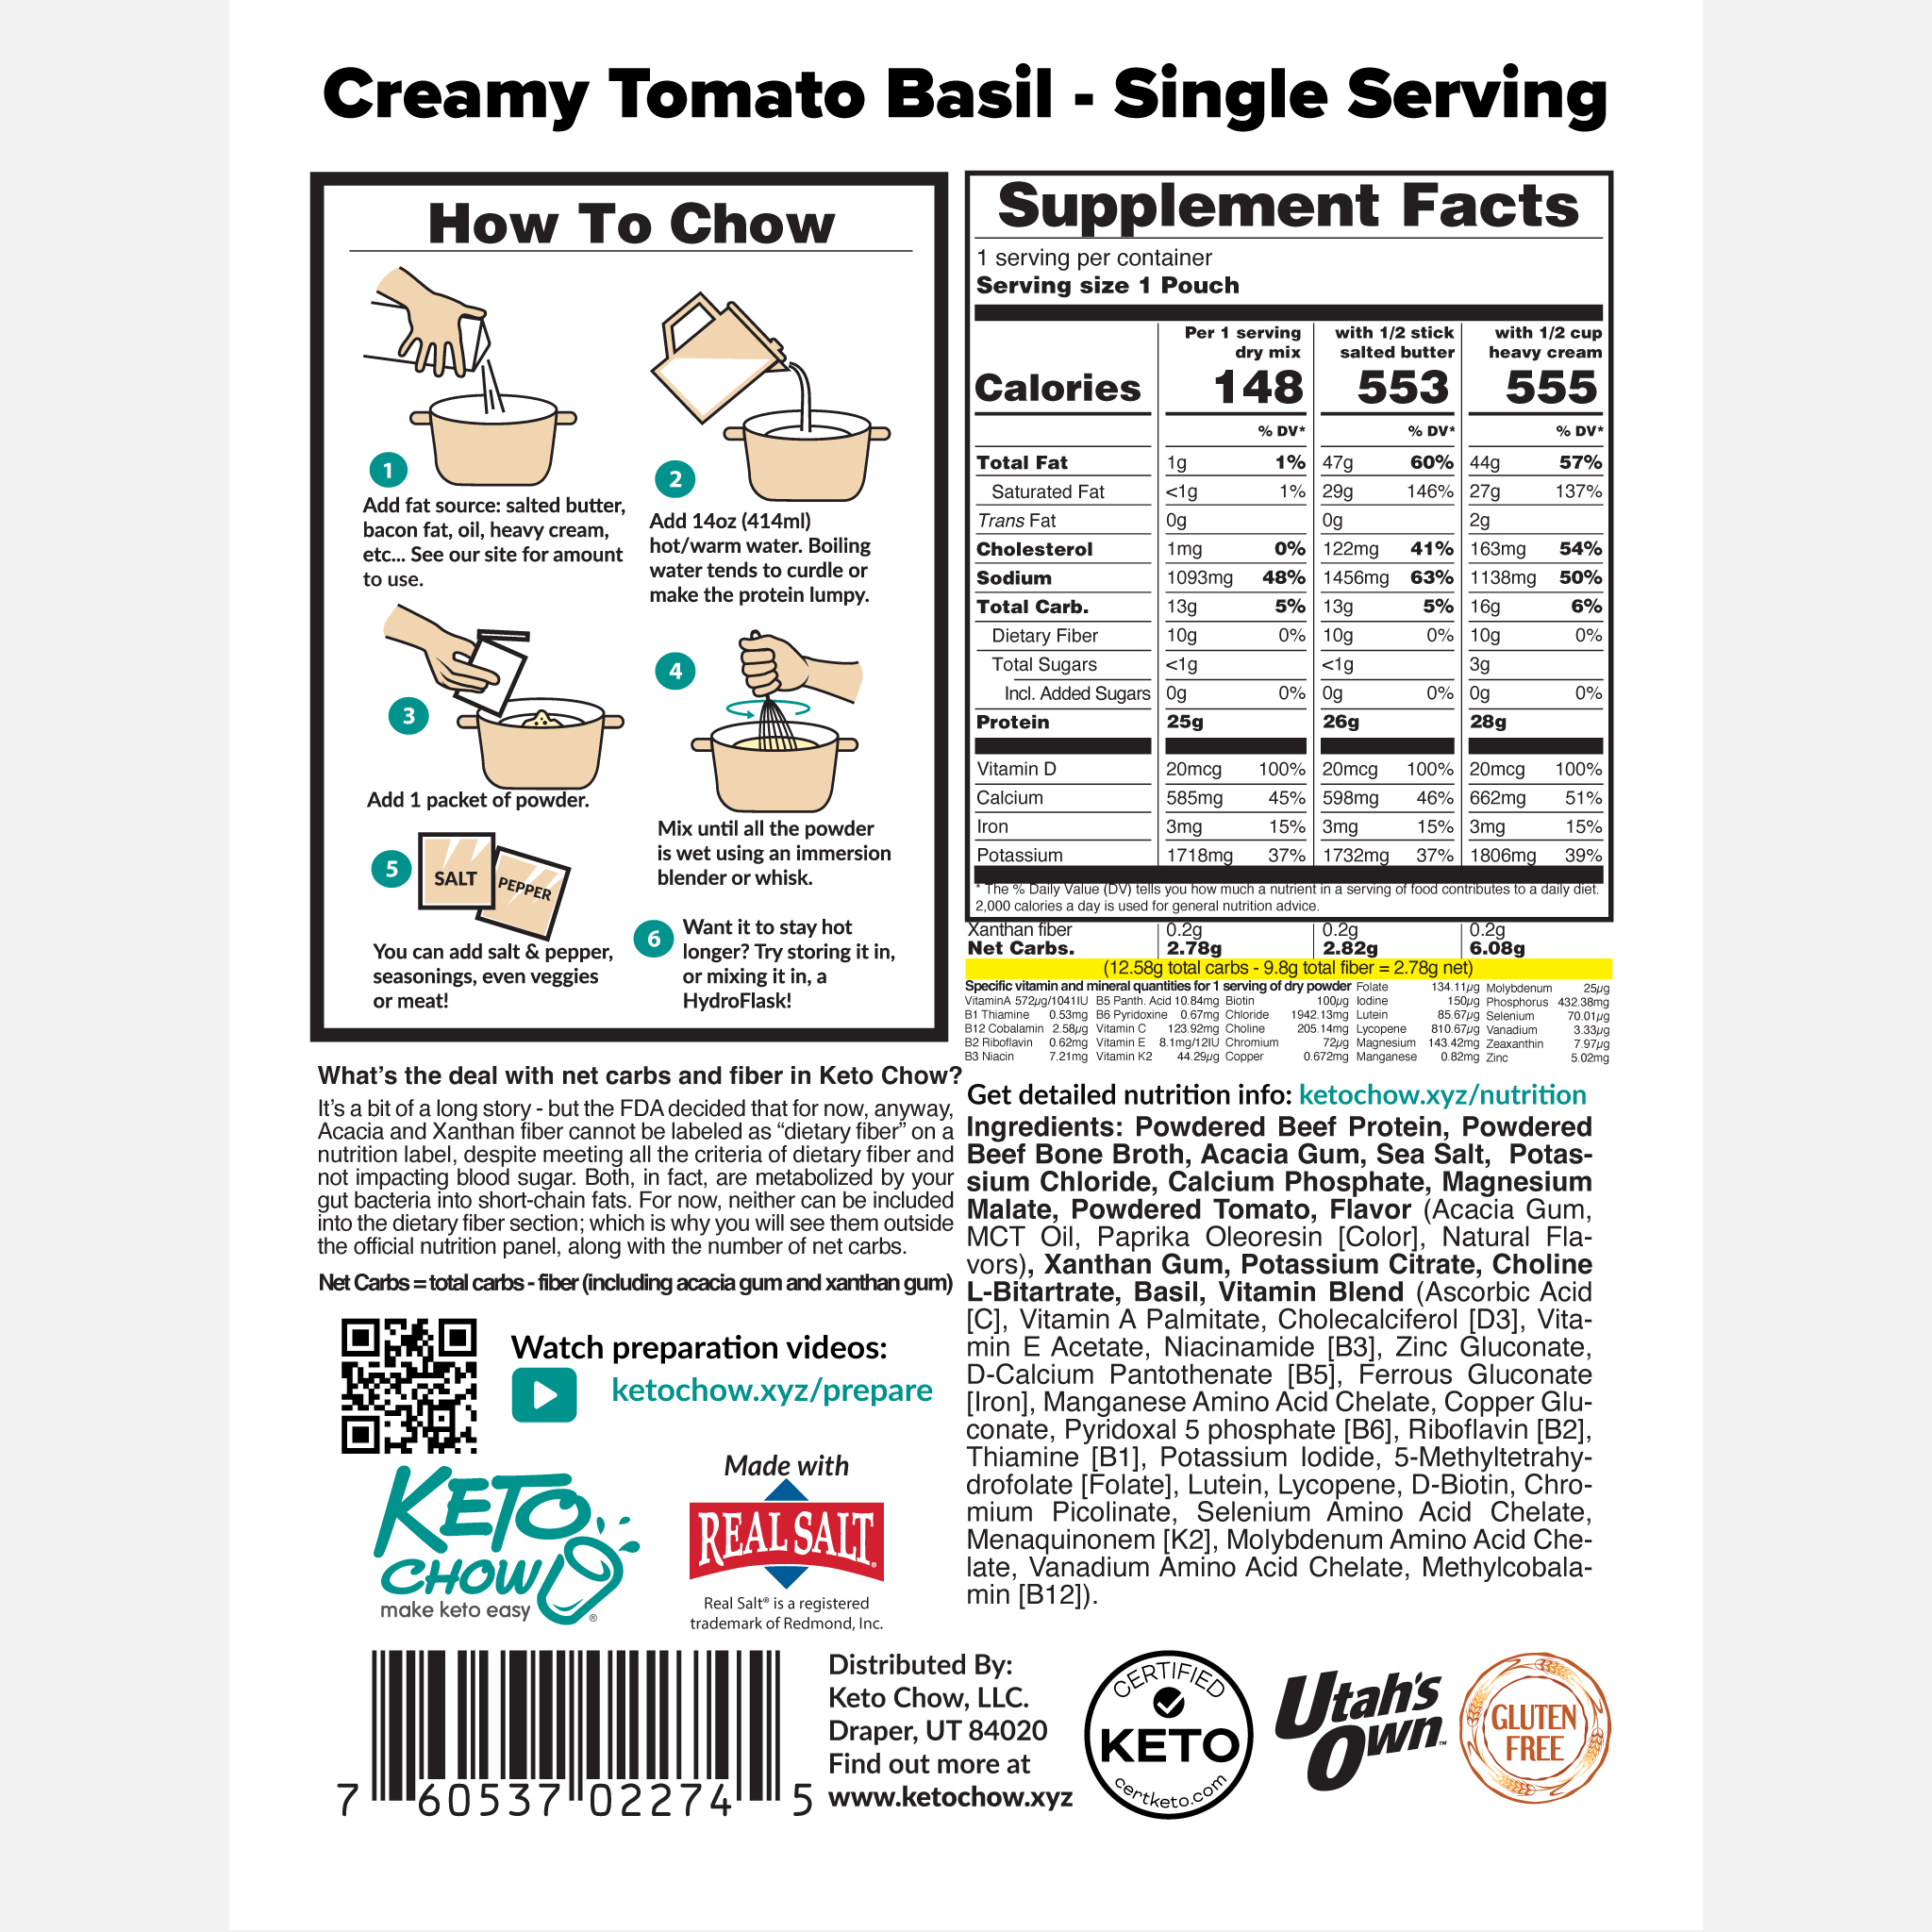 Tomato Basil Keto Chow package back